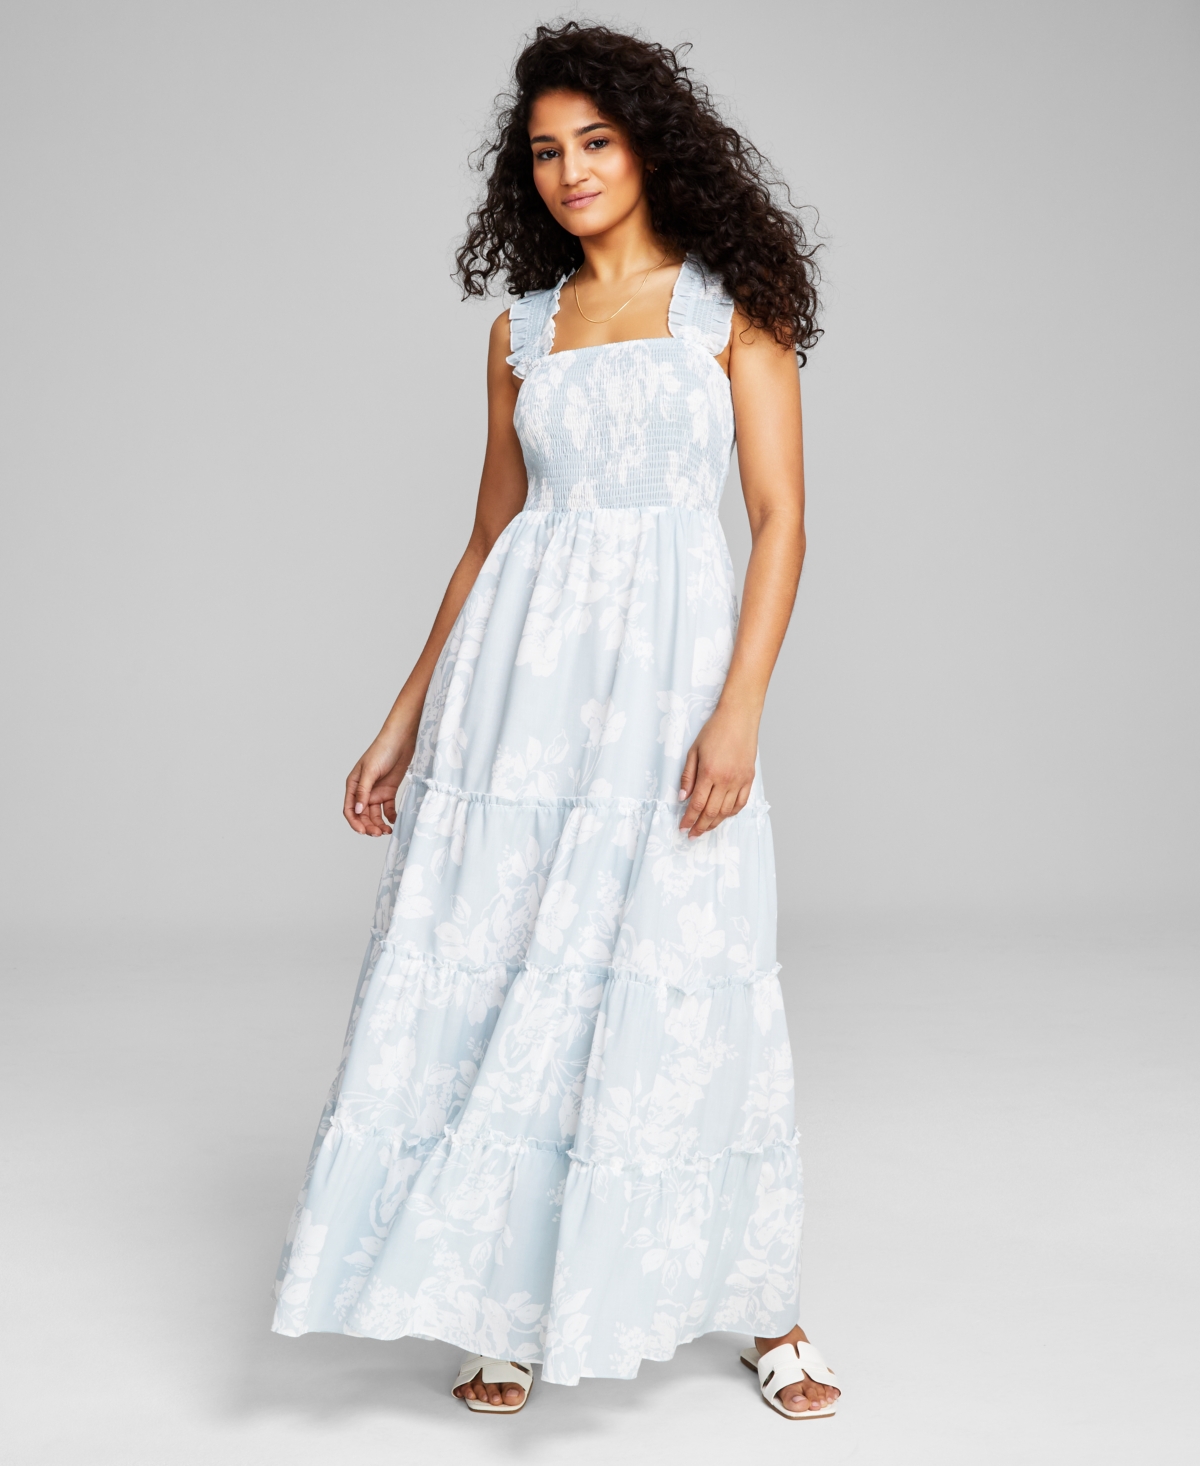 Shop And Now This Women's Printed Smocked Sleeveless Tiered Maxi Dress In Blue Floral